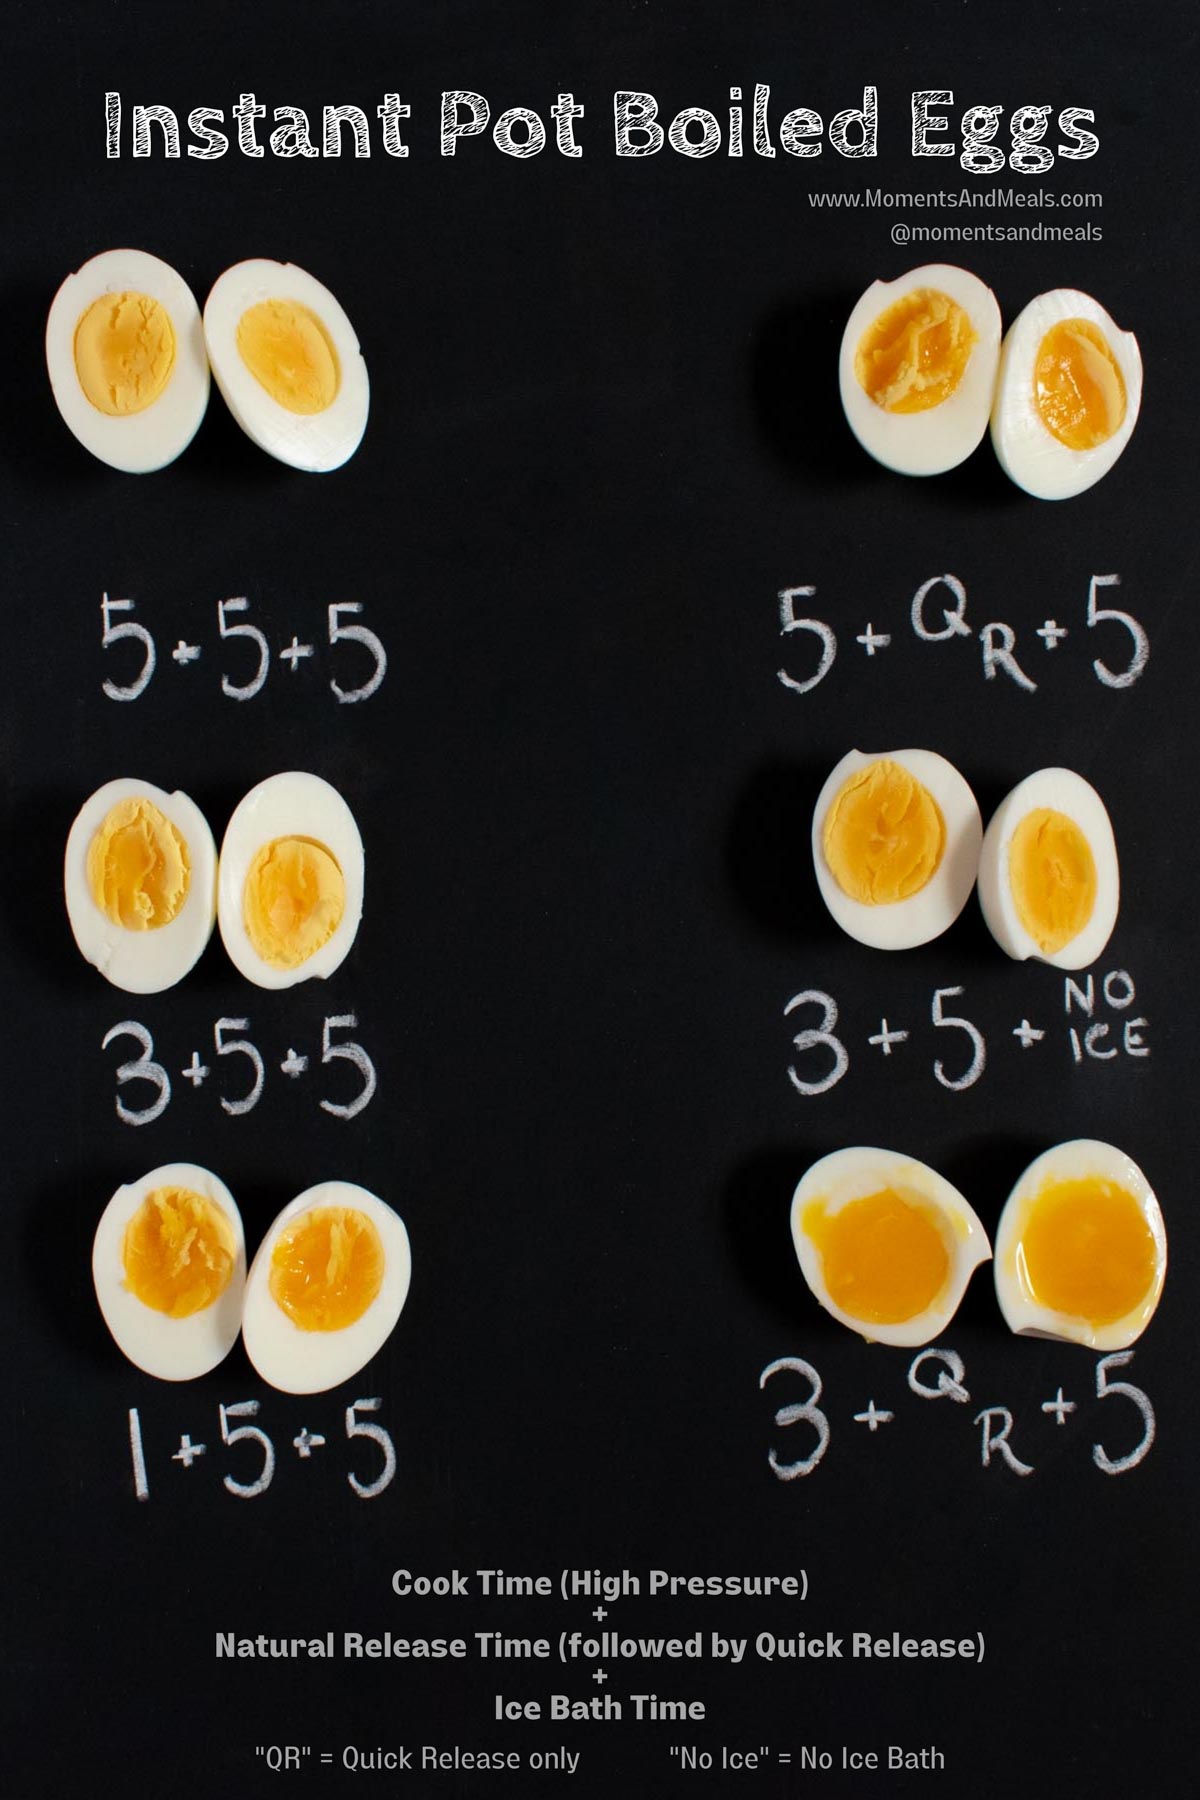 6 eggs sliced in half lengthwise to show the level of doneness of the yolk. On a black background.